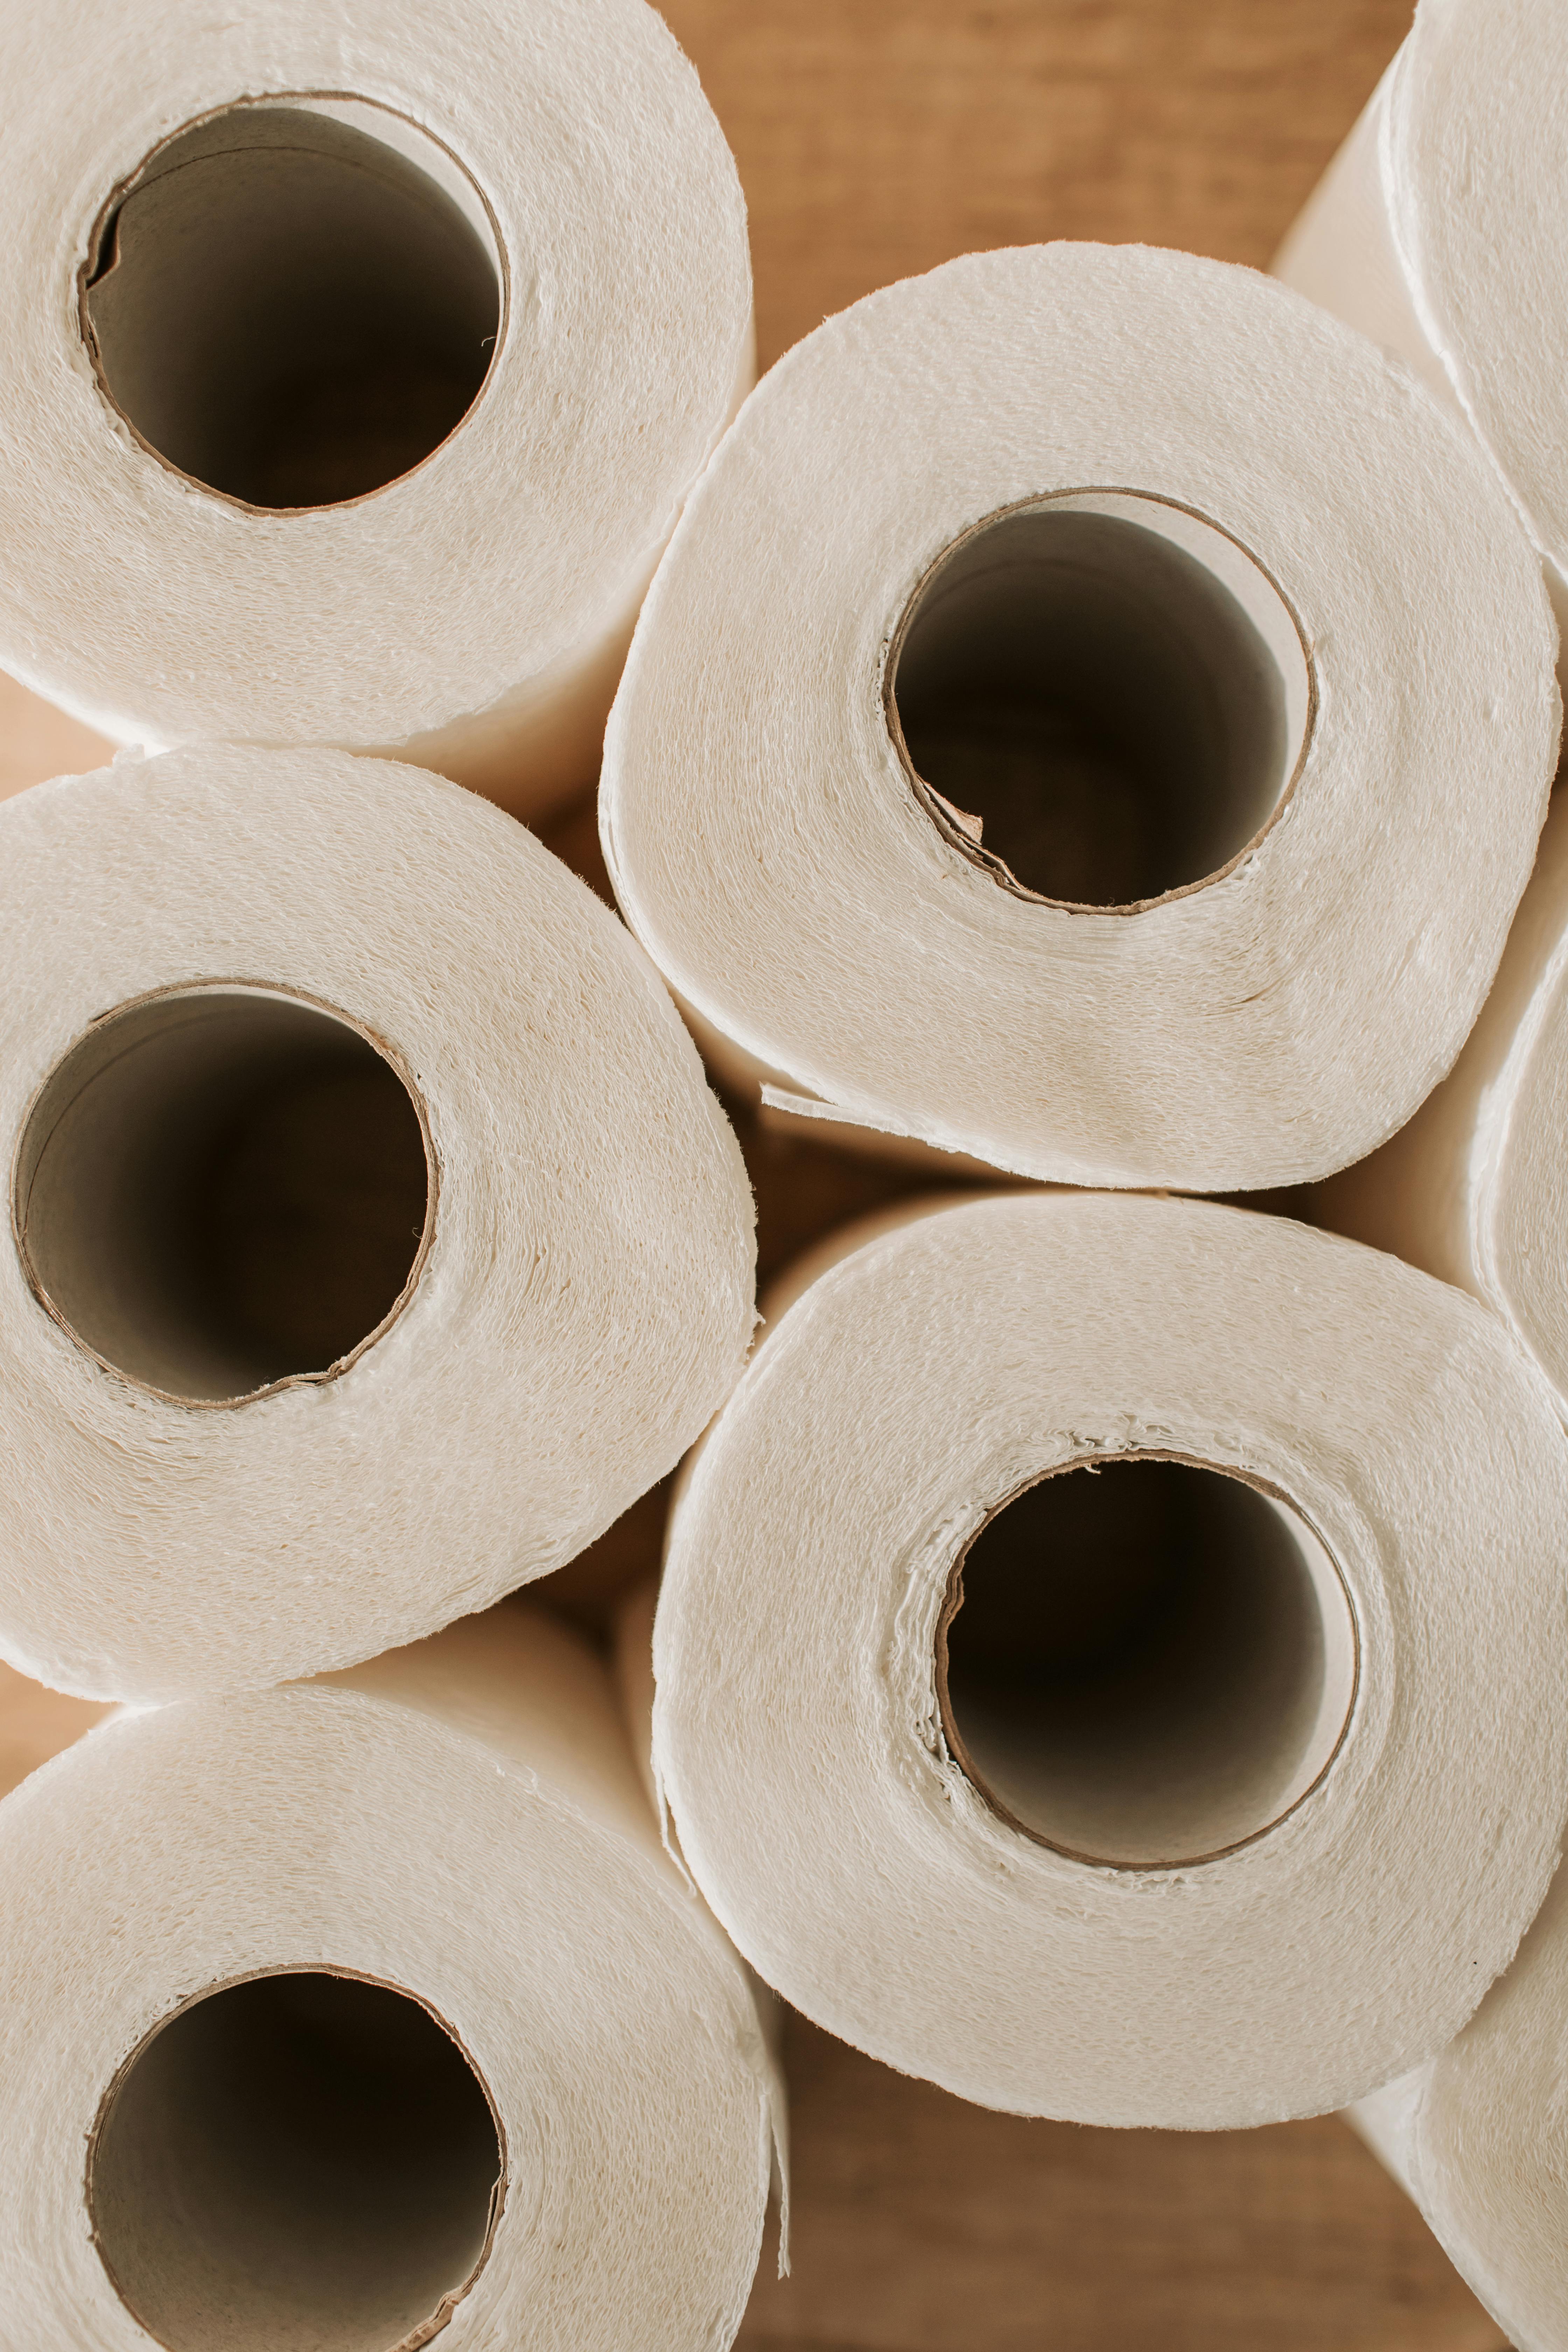 Use paper towels to remove as much litter as possible and let it dry naturally. | Source: Pexels